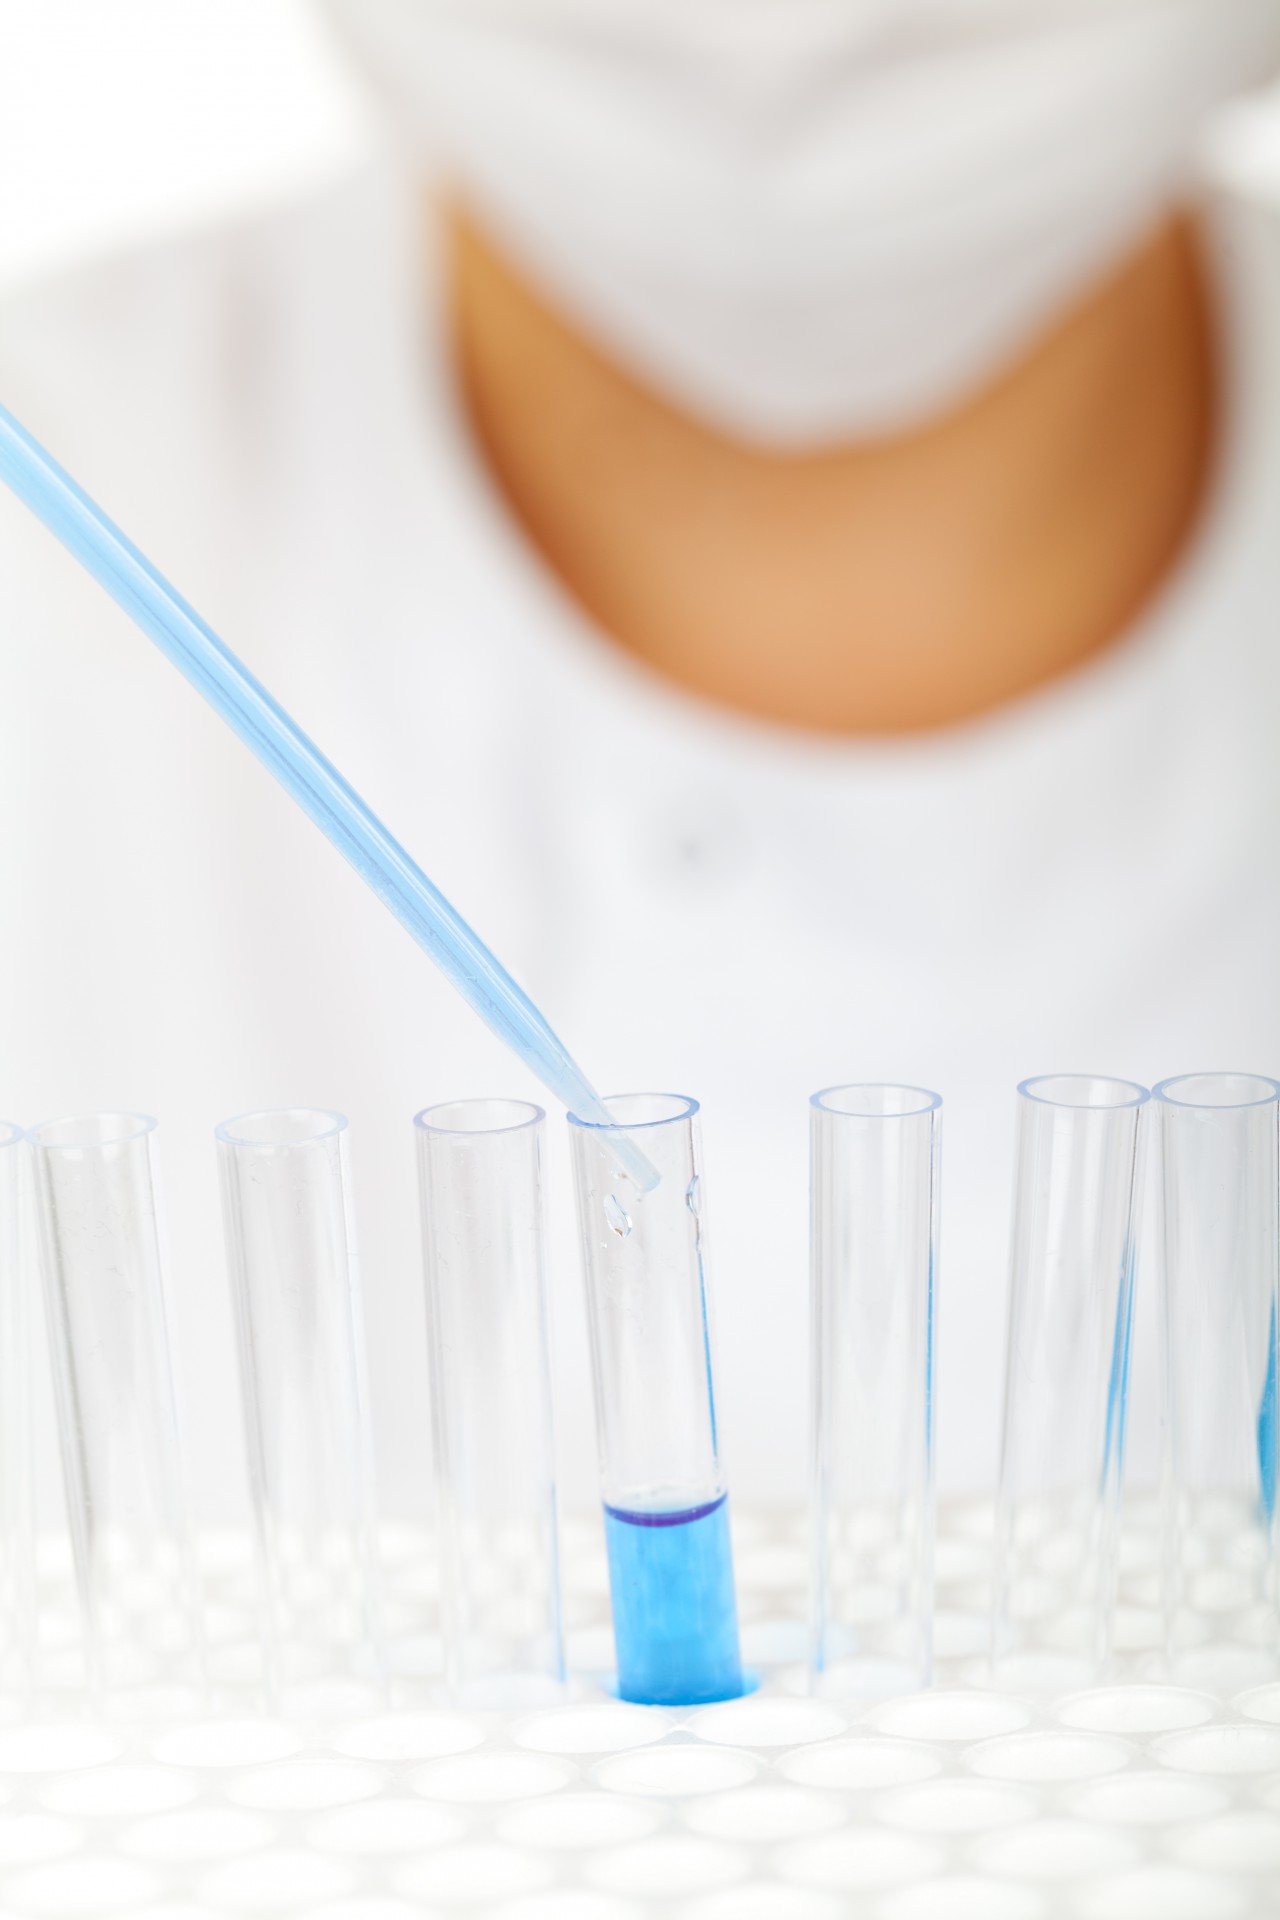 a scientist fills test tubes with blue liquid